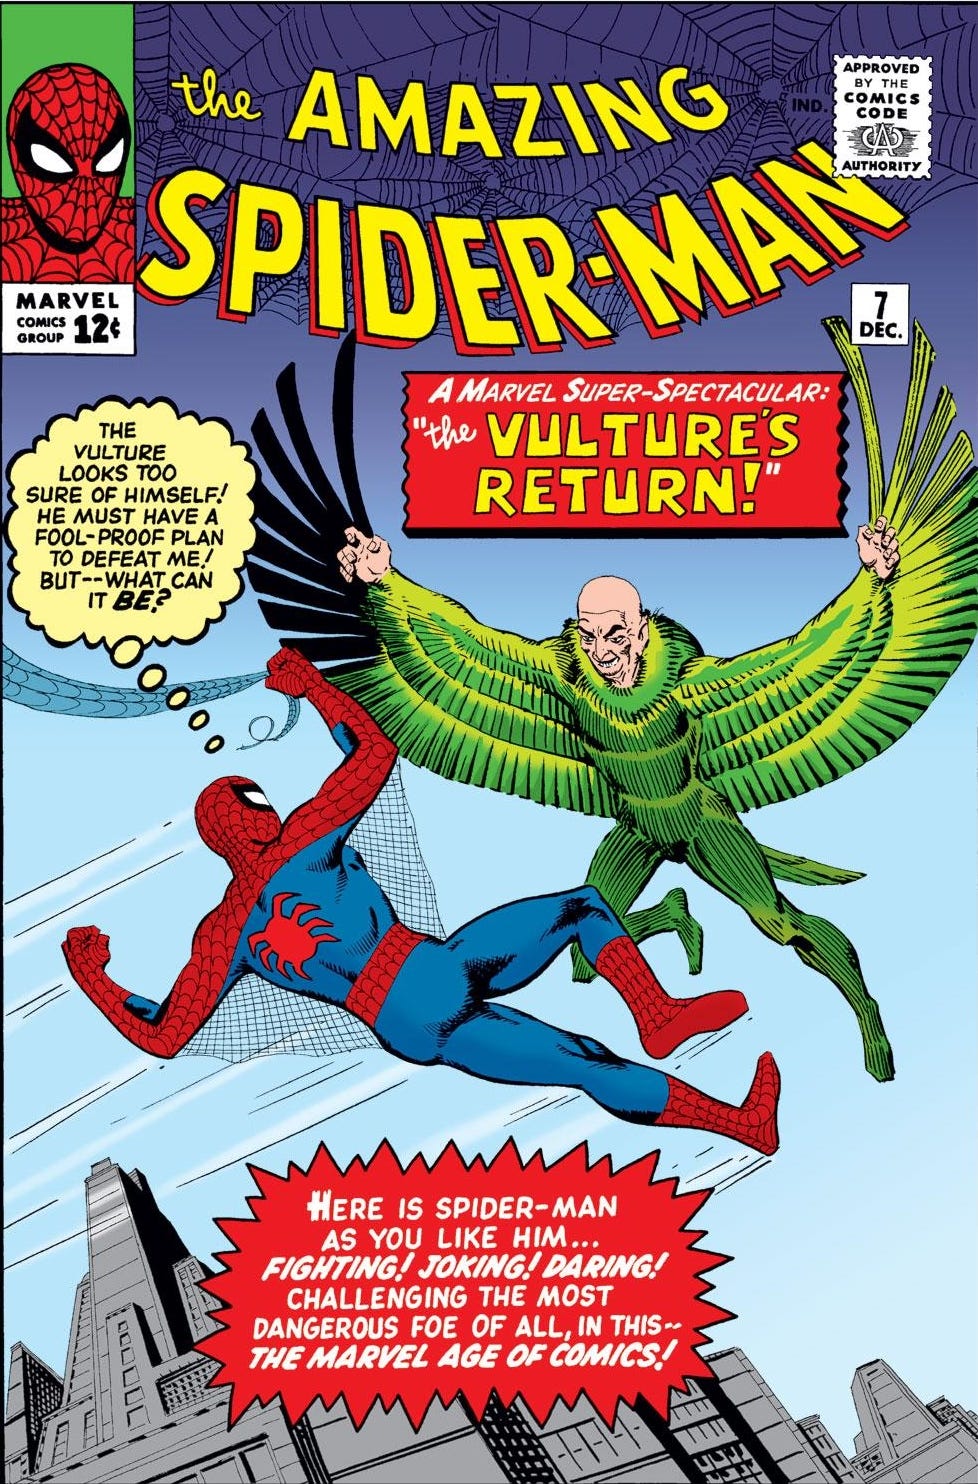 The Amazing Spider-Man #7 Review | The Amazing Comic Book Reviews